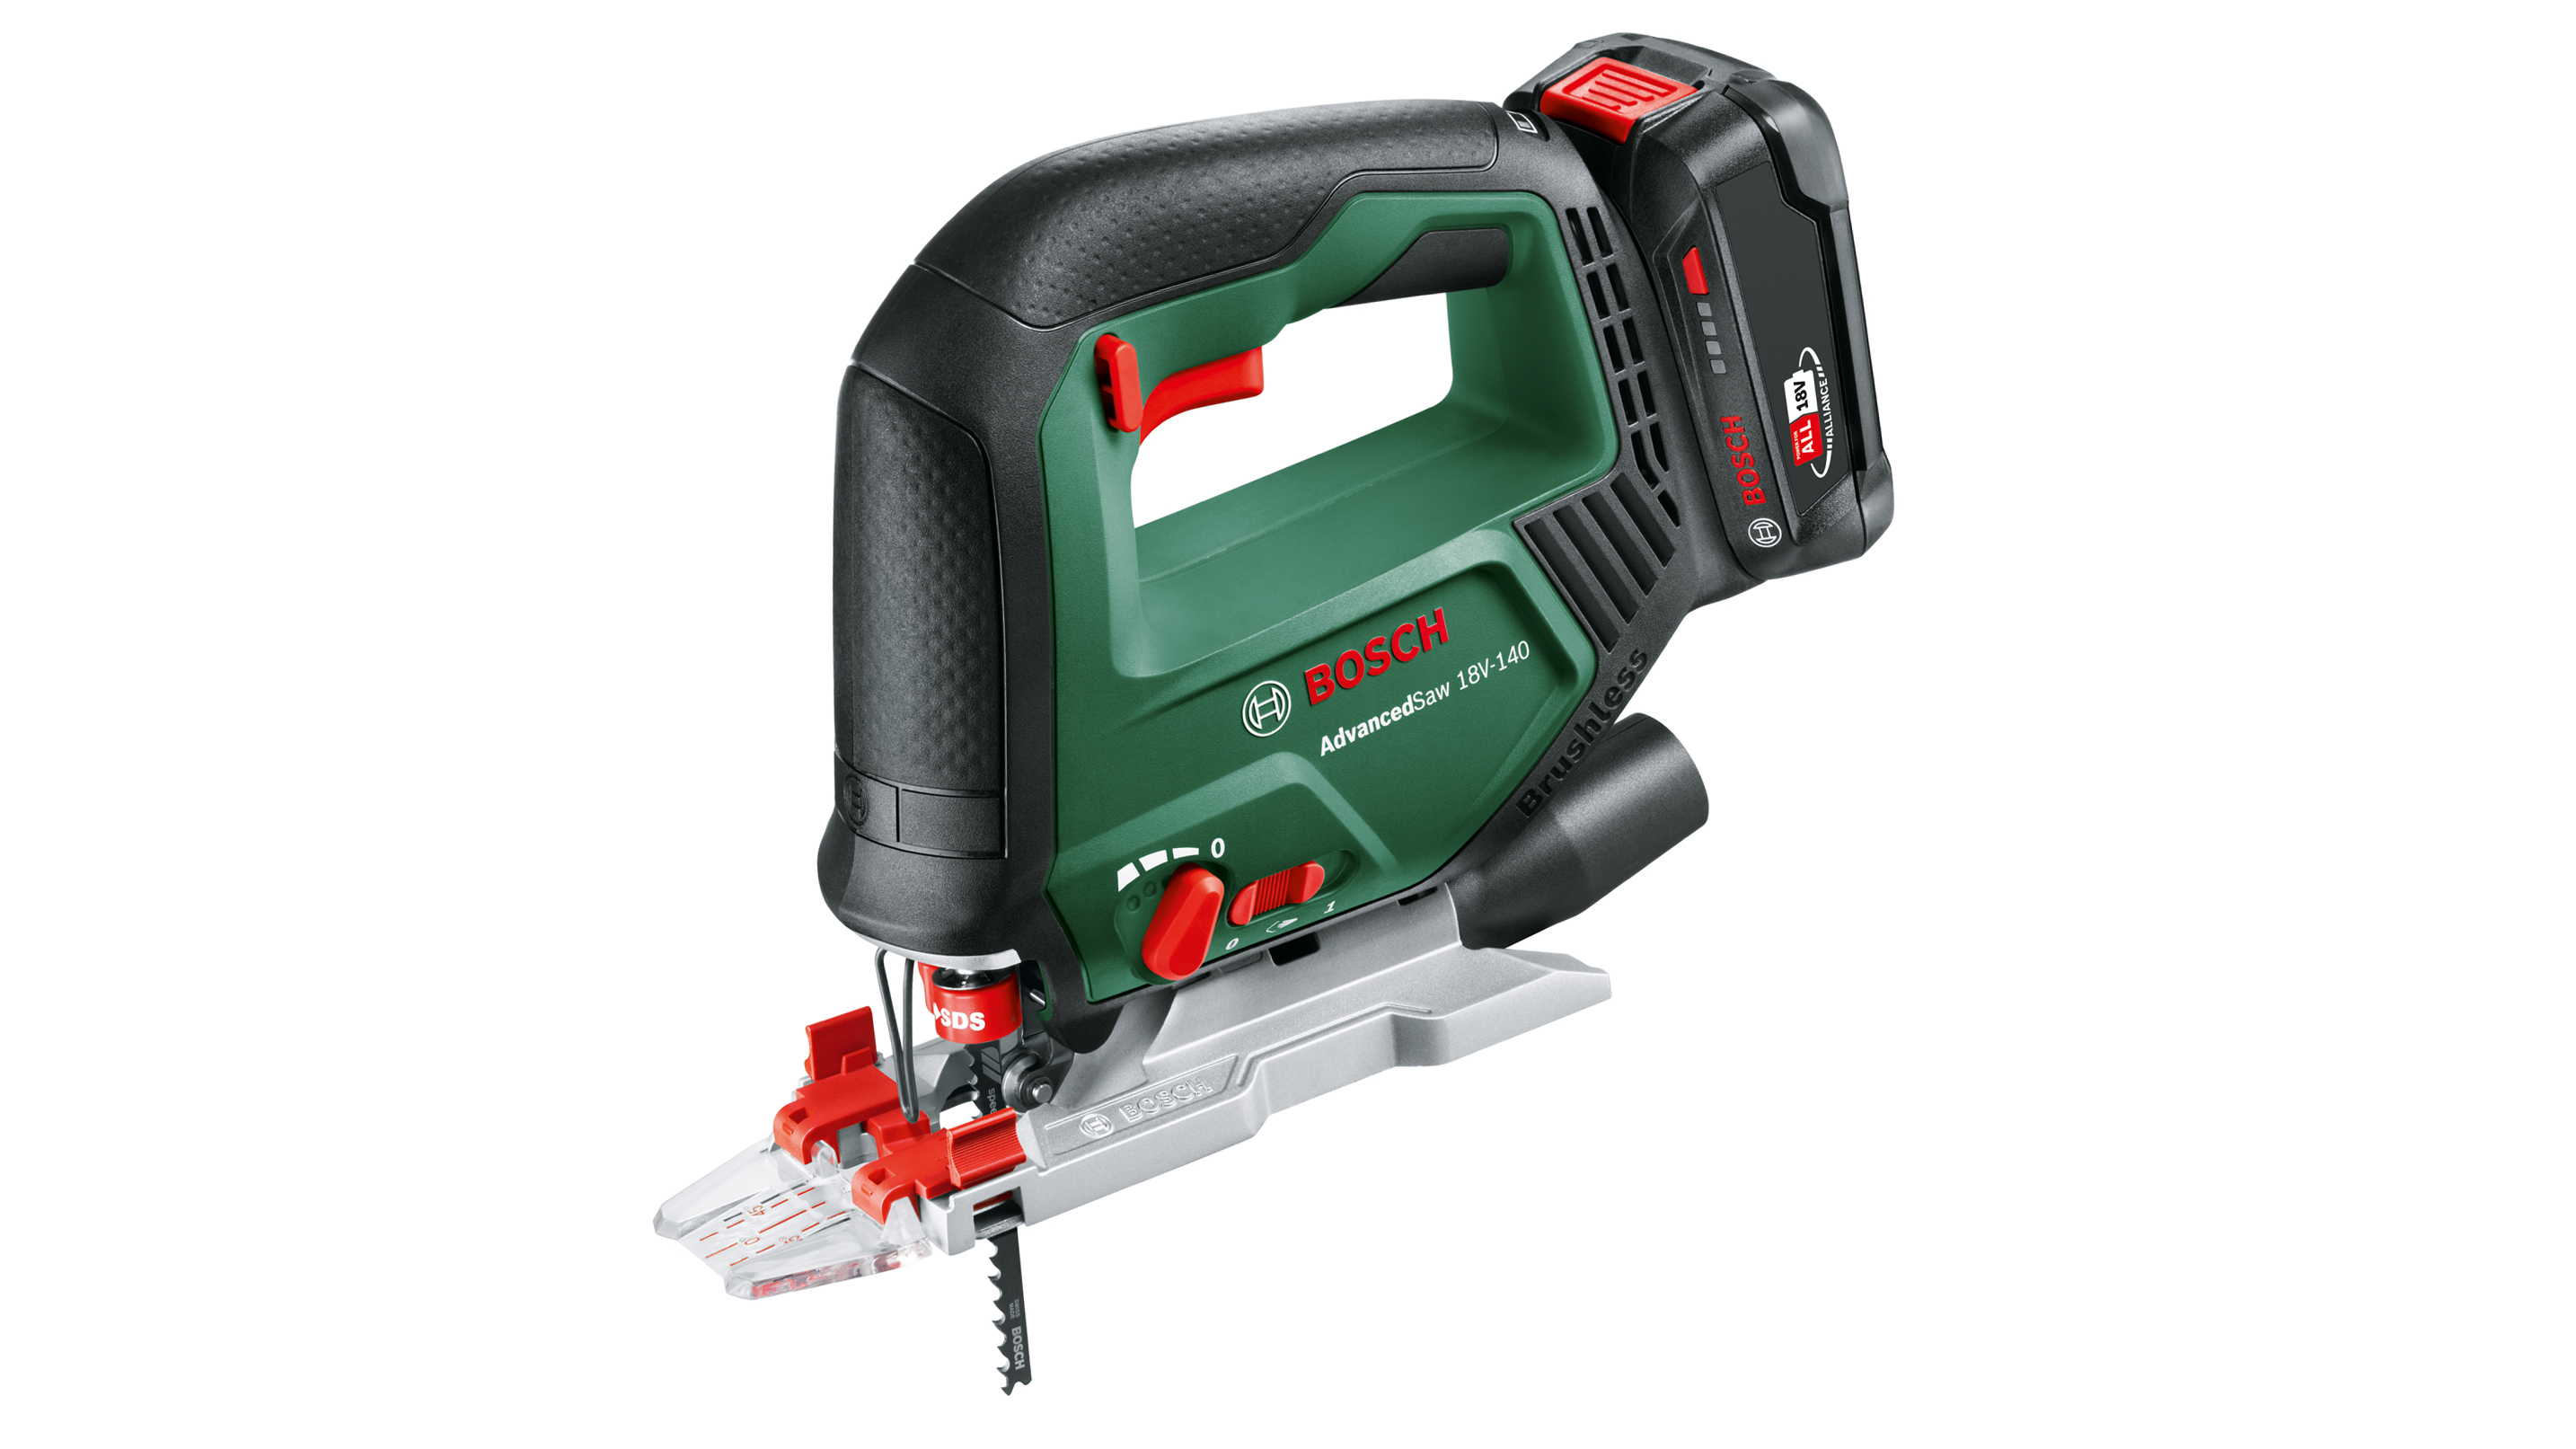 Latest addition to the ‘18V Power for All System’ from Bosch: New cordless jigsaw for DIYers